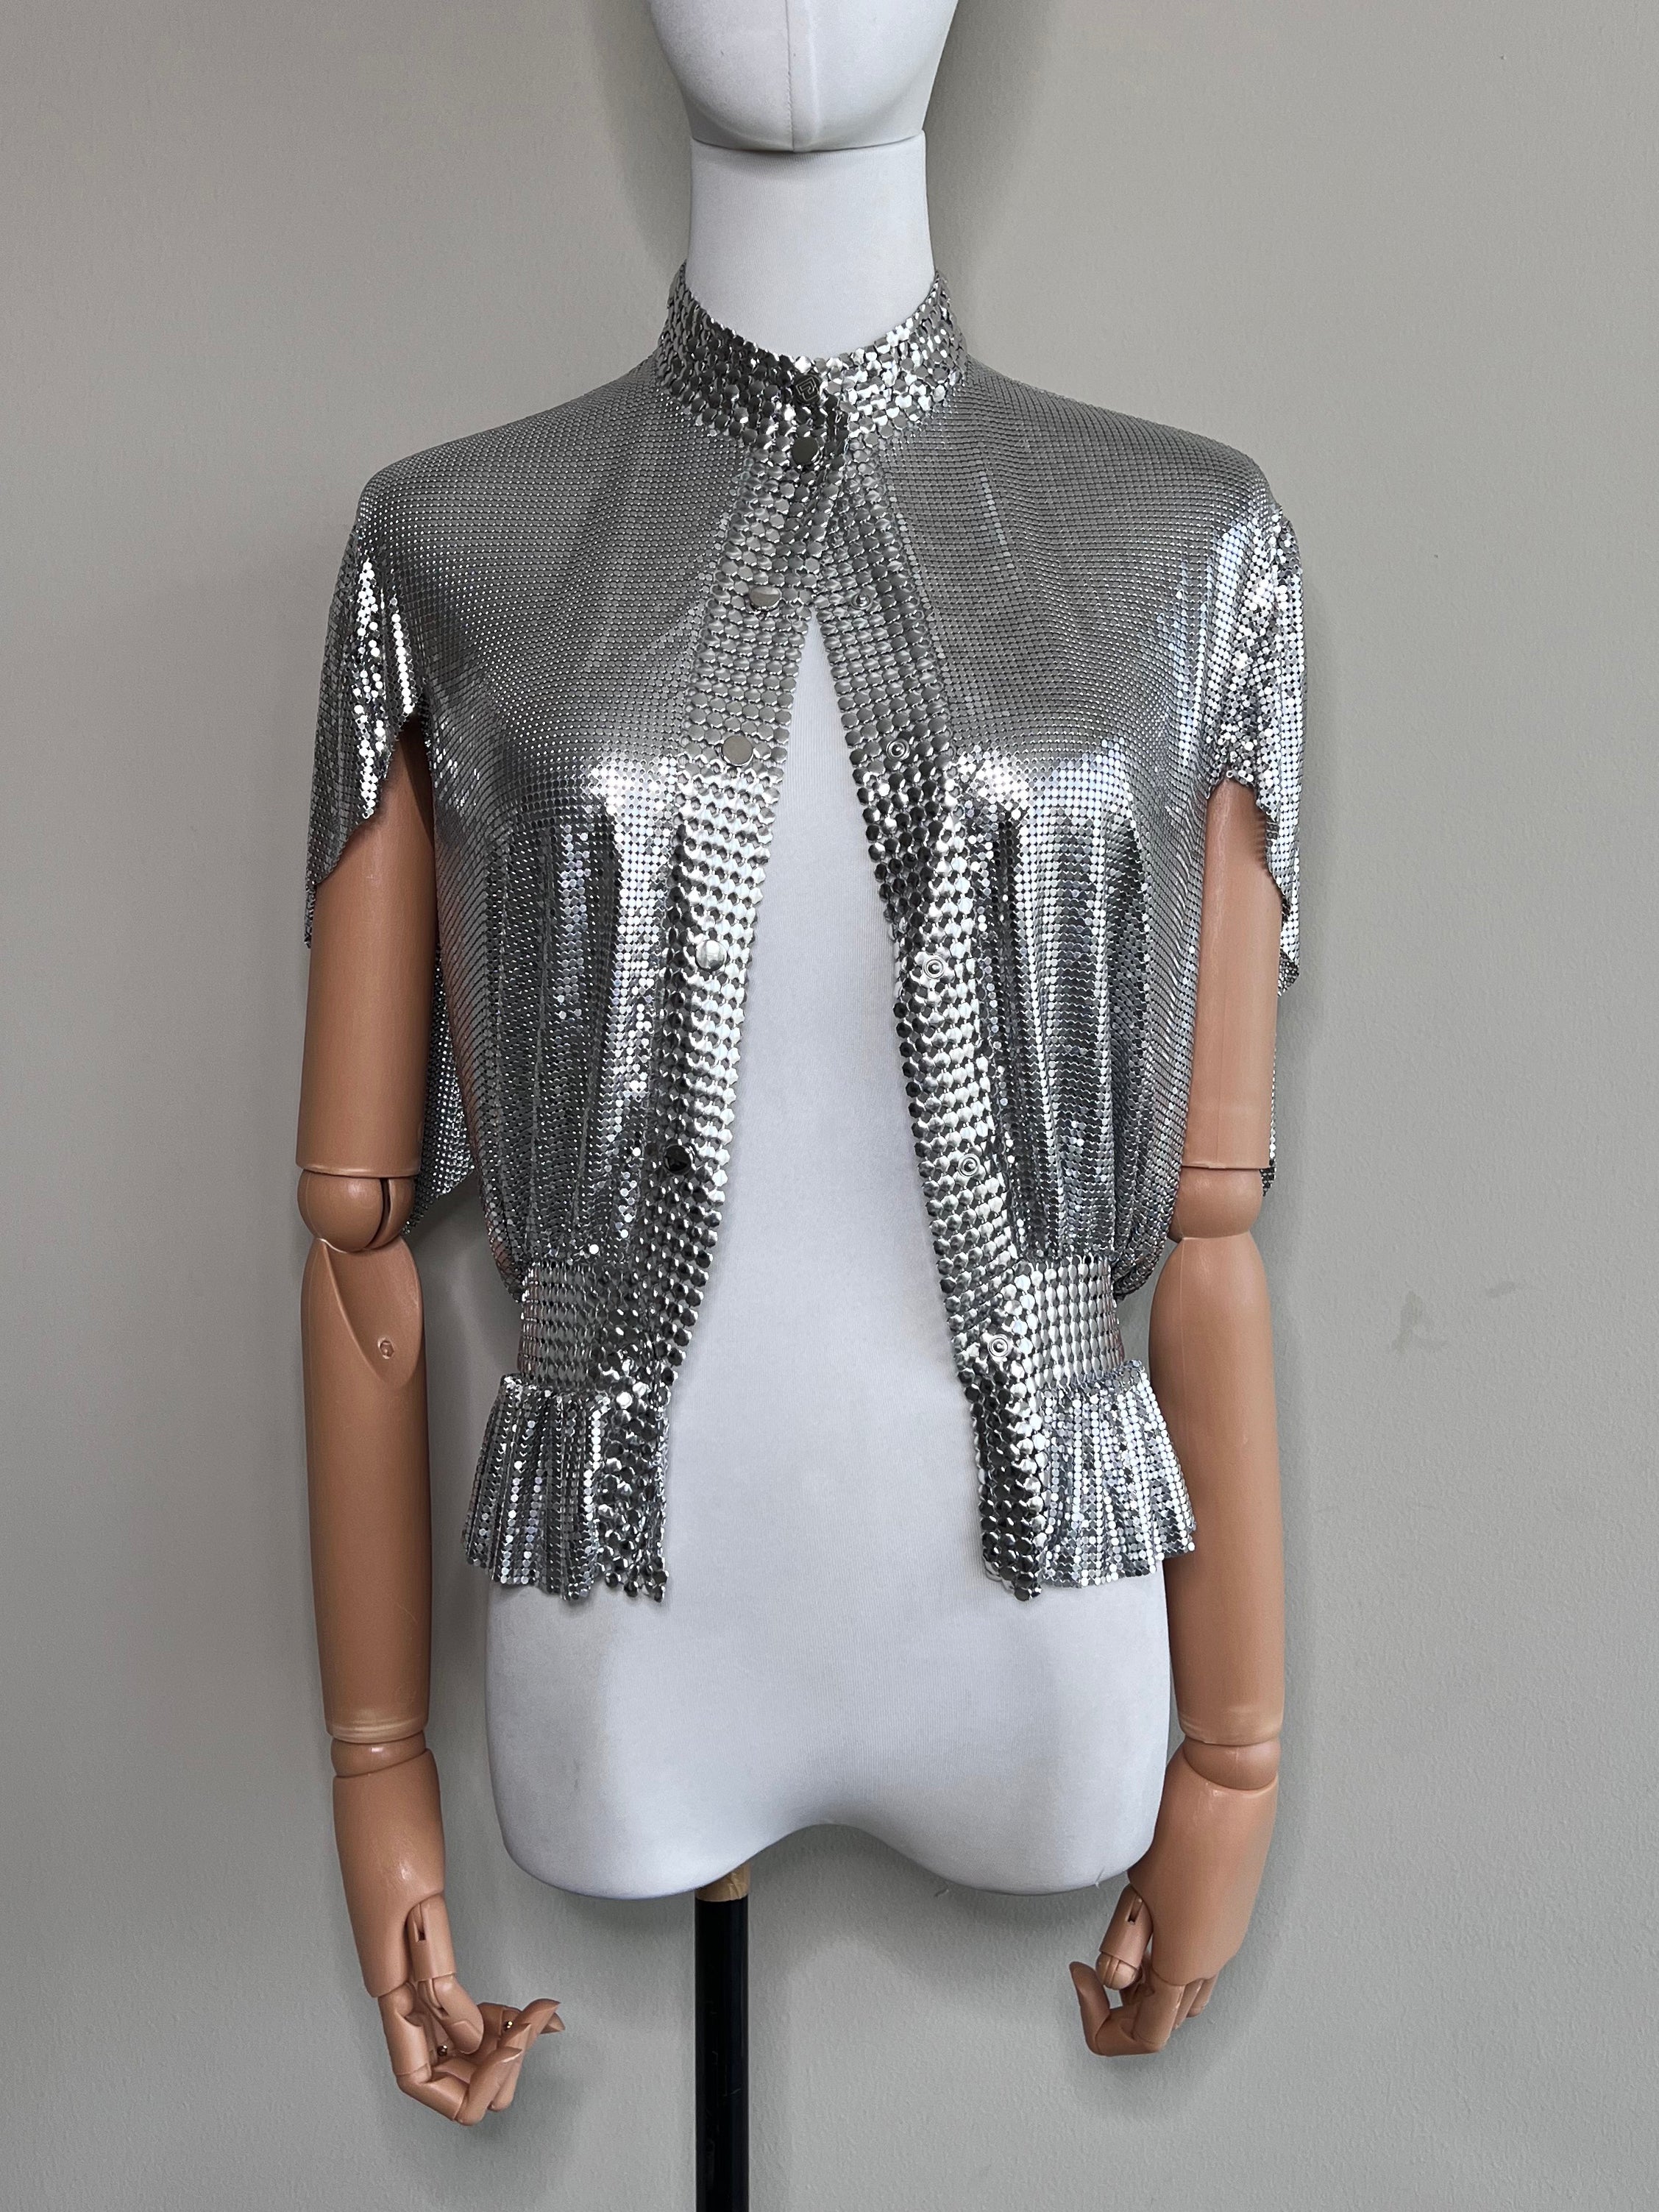 Silver chainmail crop top - PACO RABANNE